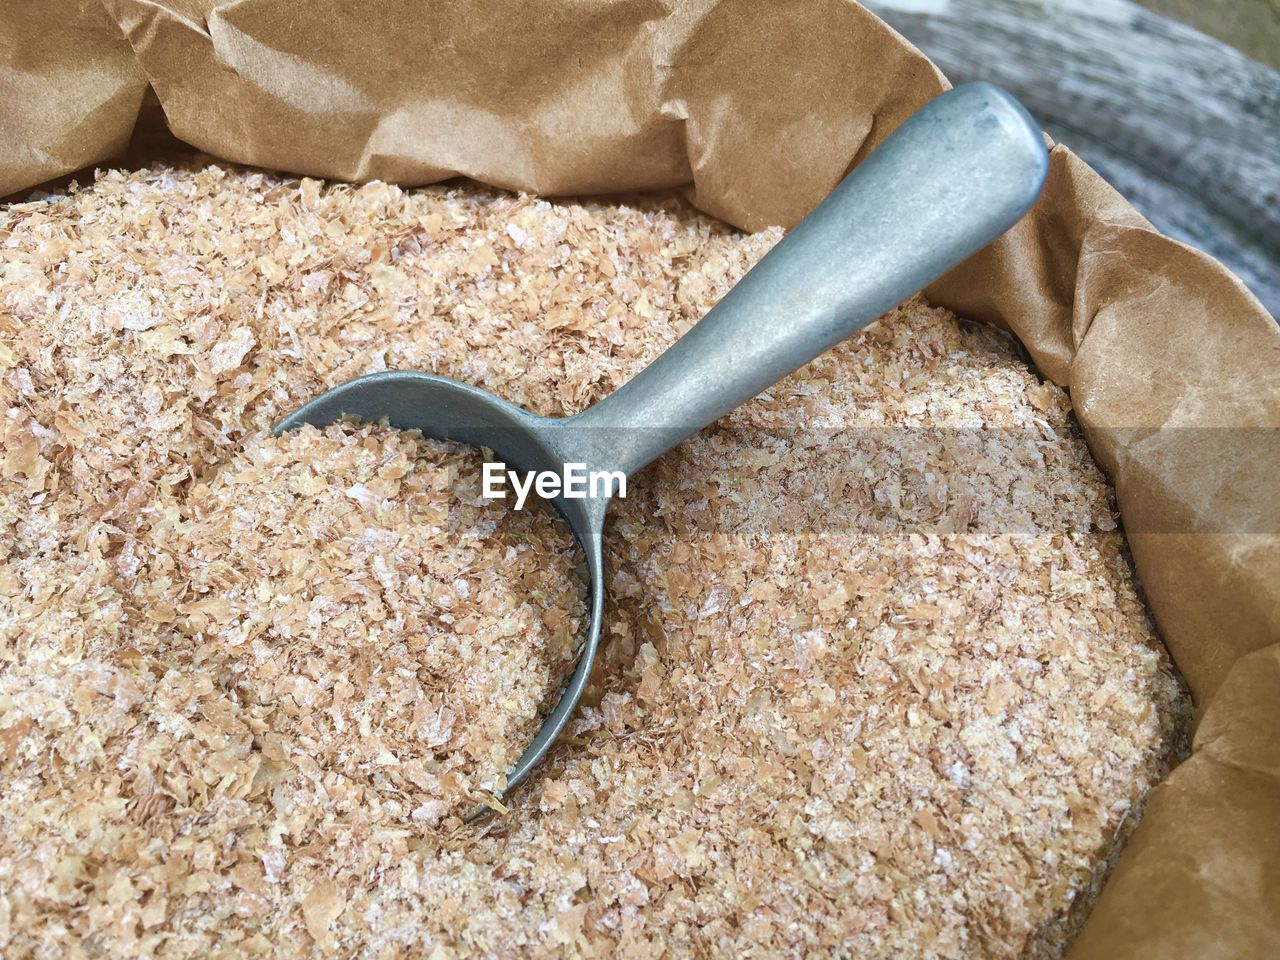 High angle view of wheat bran in paper bag